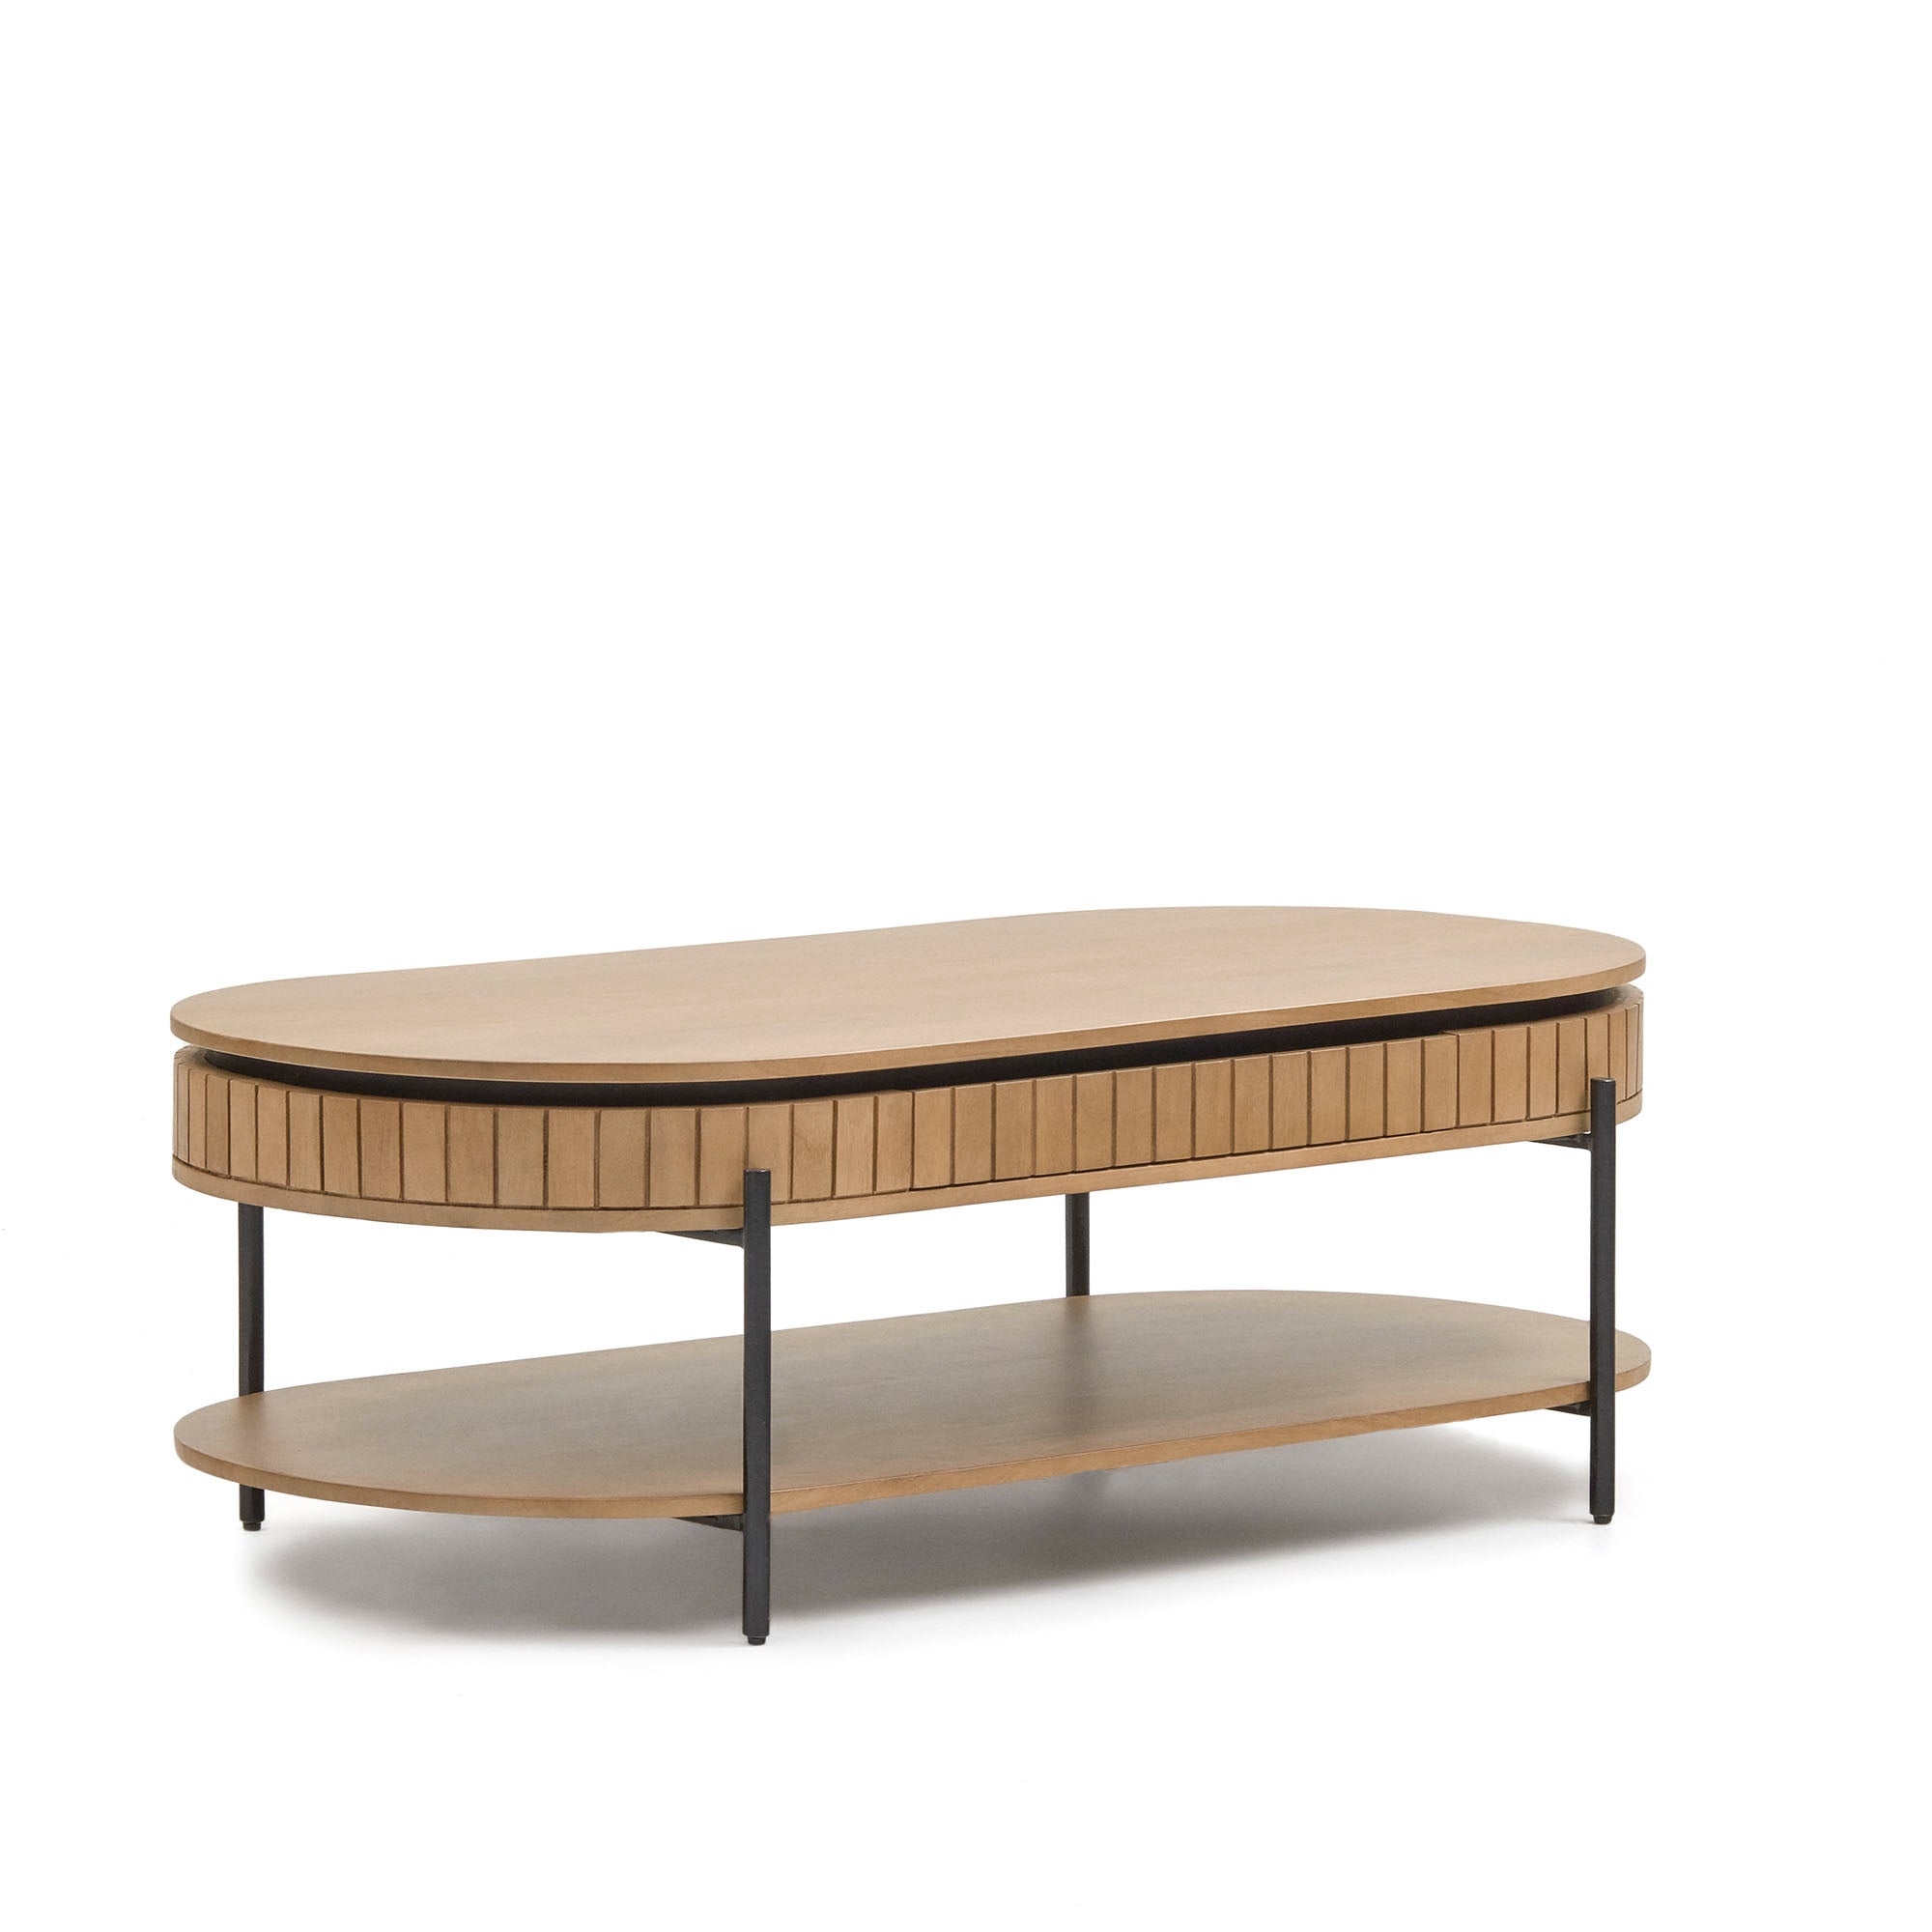 Licia mango wood coffee table with 1 drawer, with a natural finish and metal, 130 x 65 cm